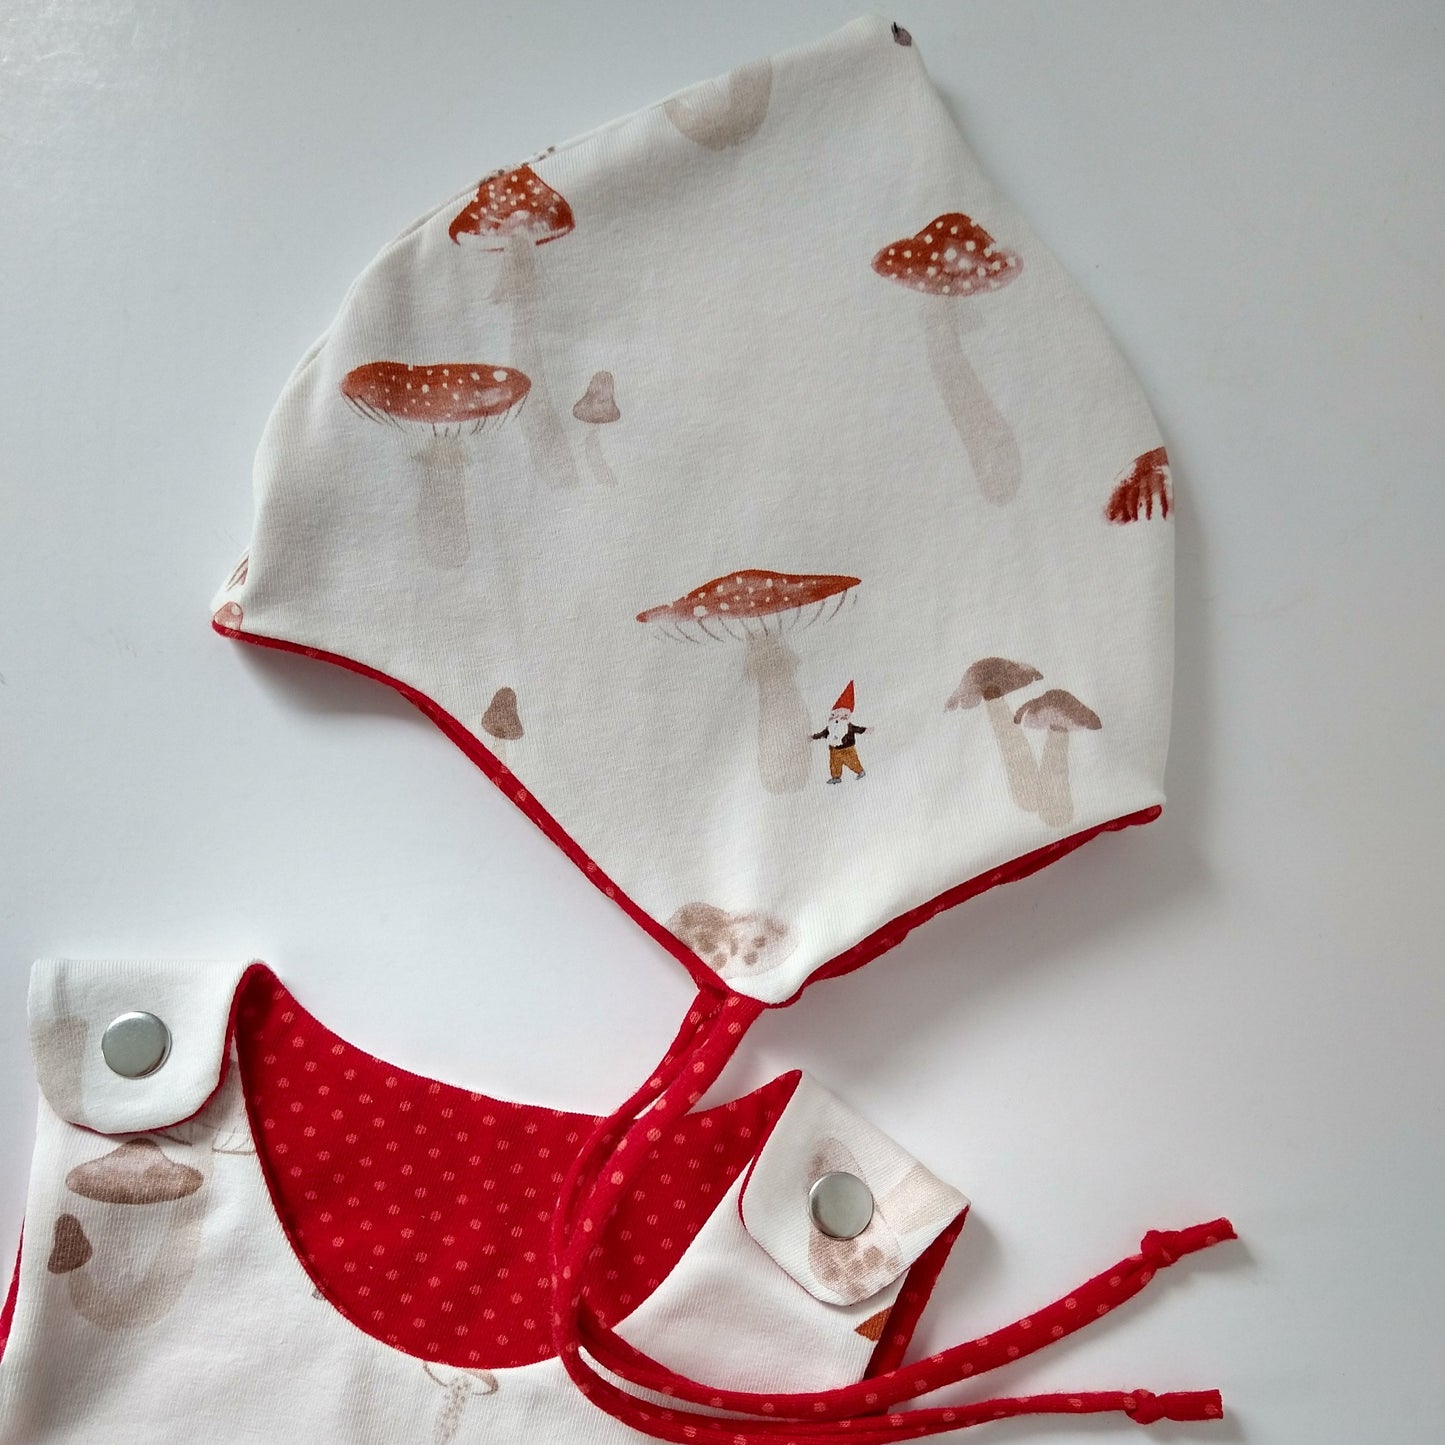 Baby romper, size EUR 62 cm / US 2-4 months, mushroom forest mix and match (Handmade in Canada)